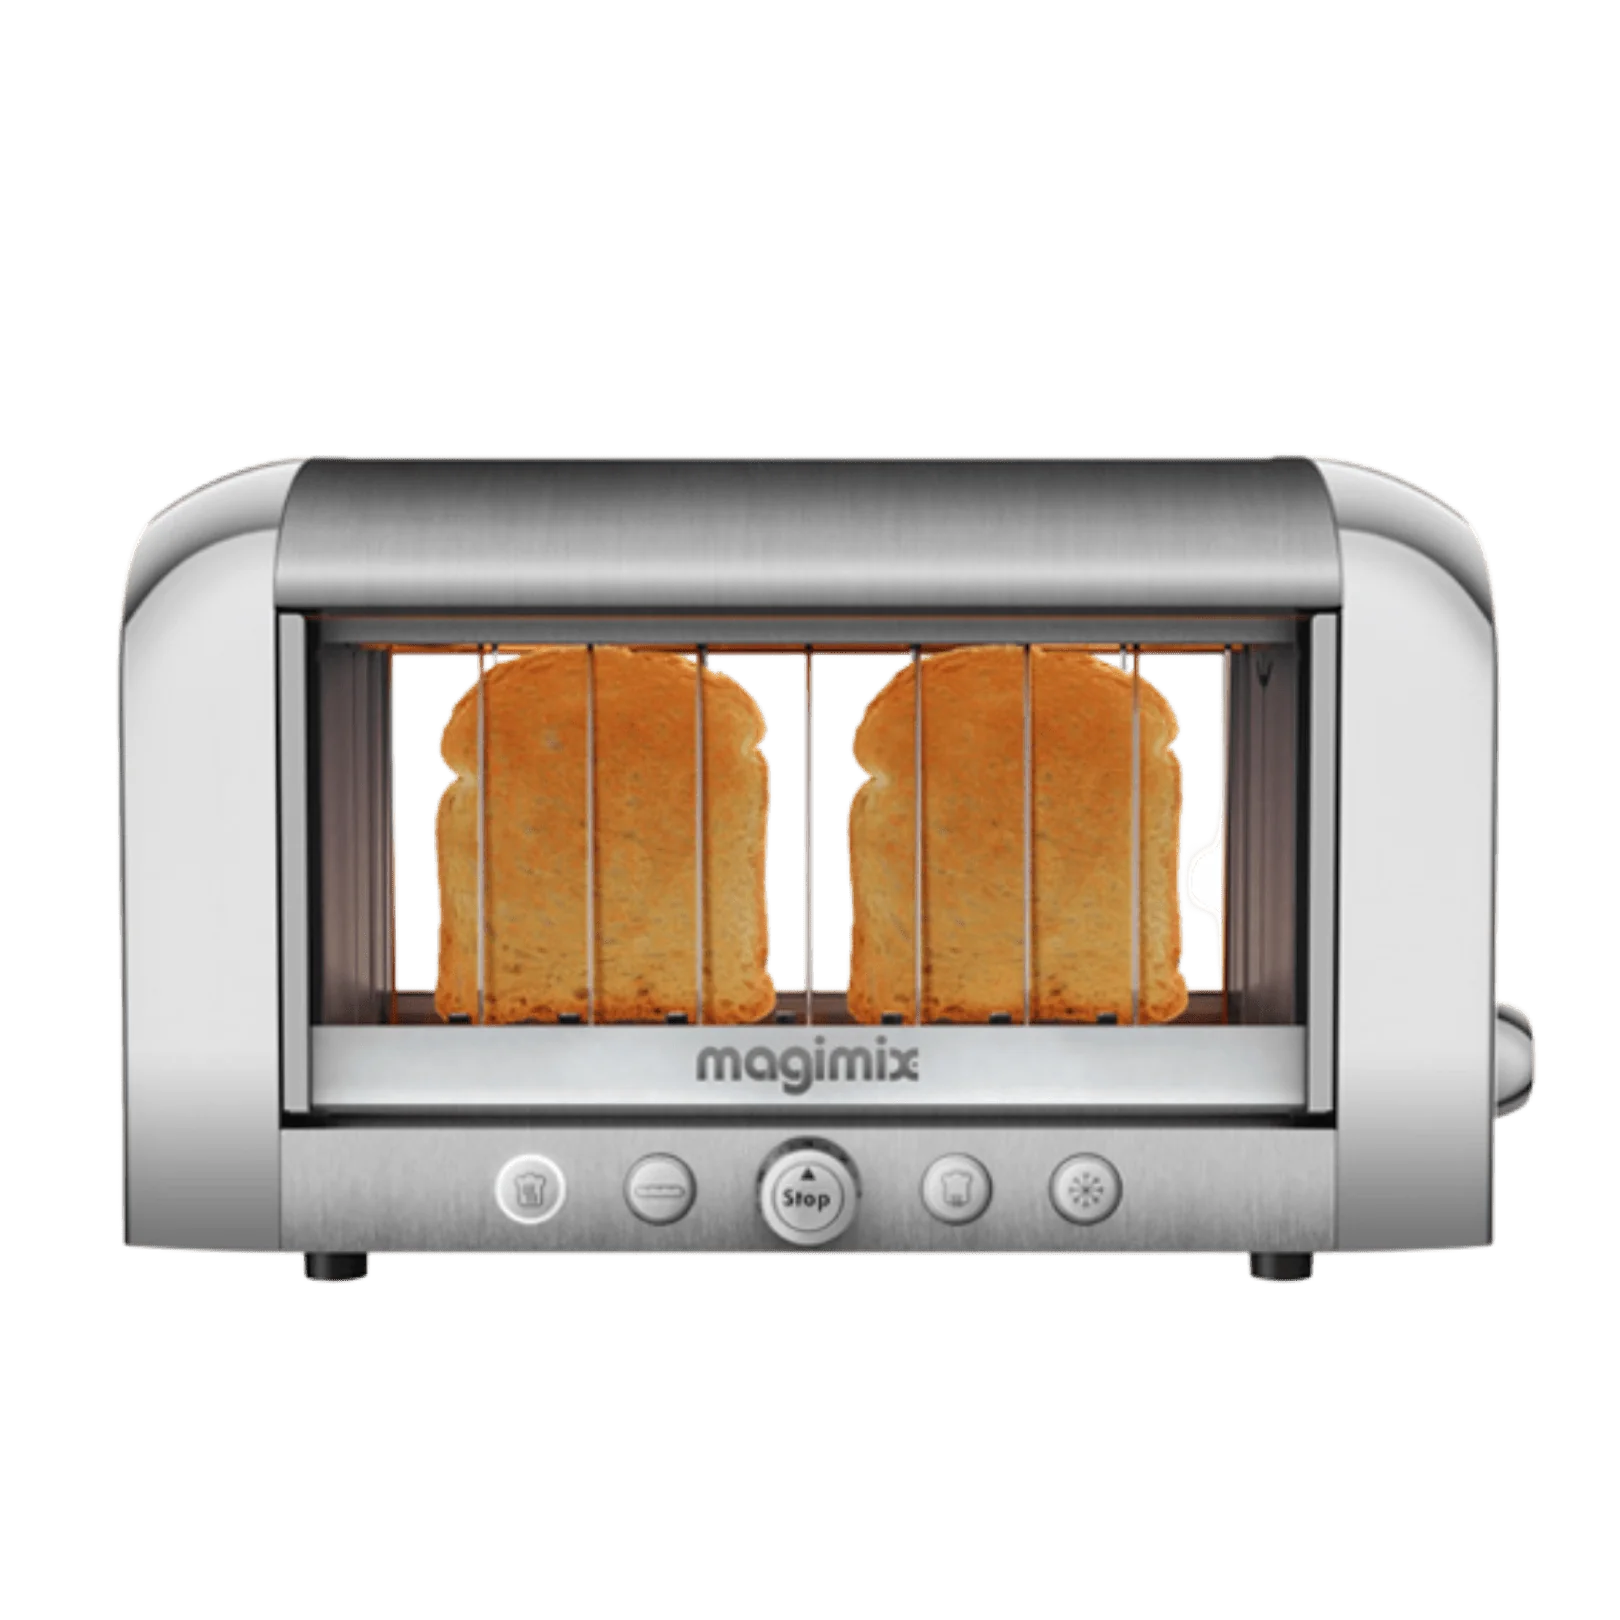 Warming Rack - Toaster Attachment